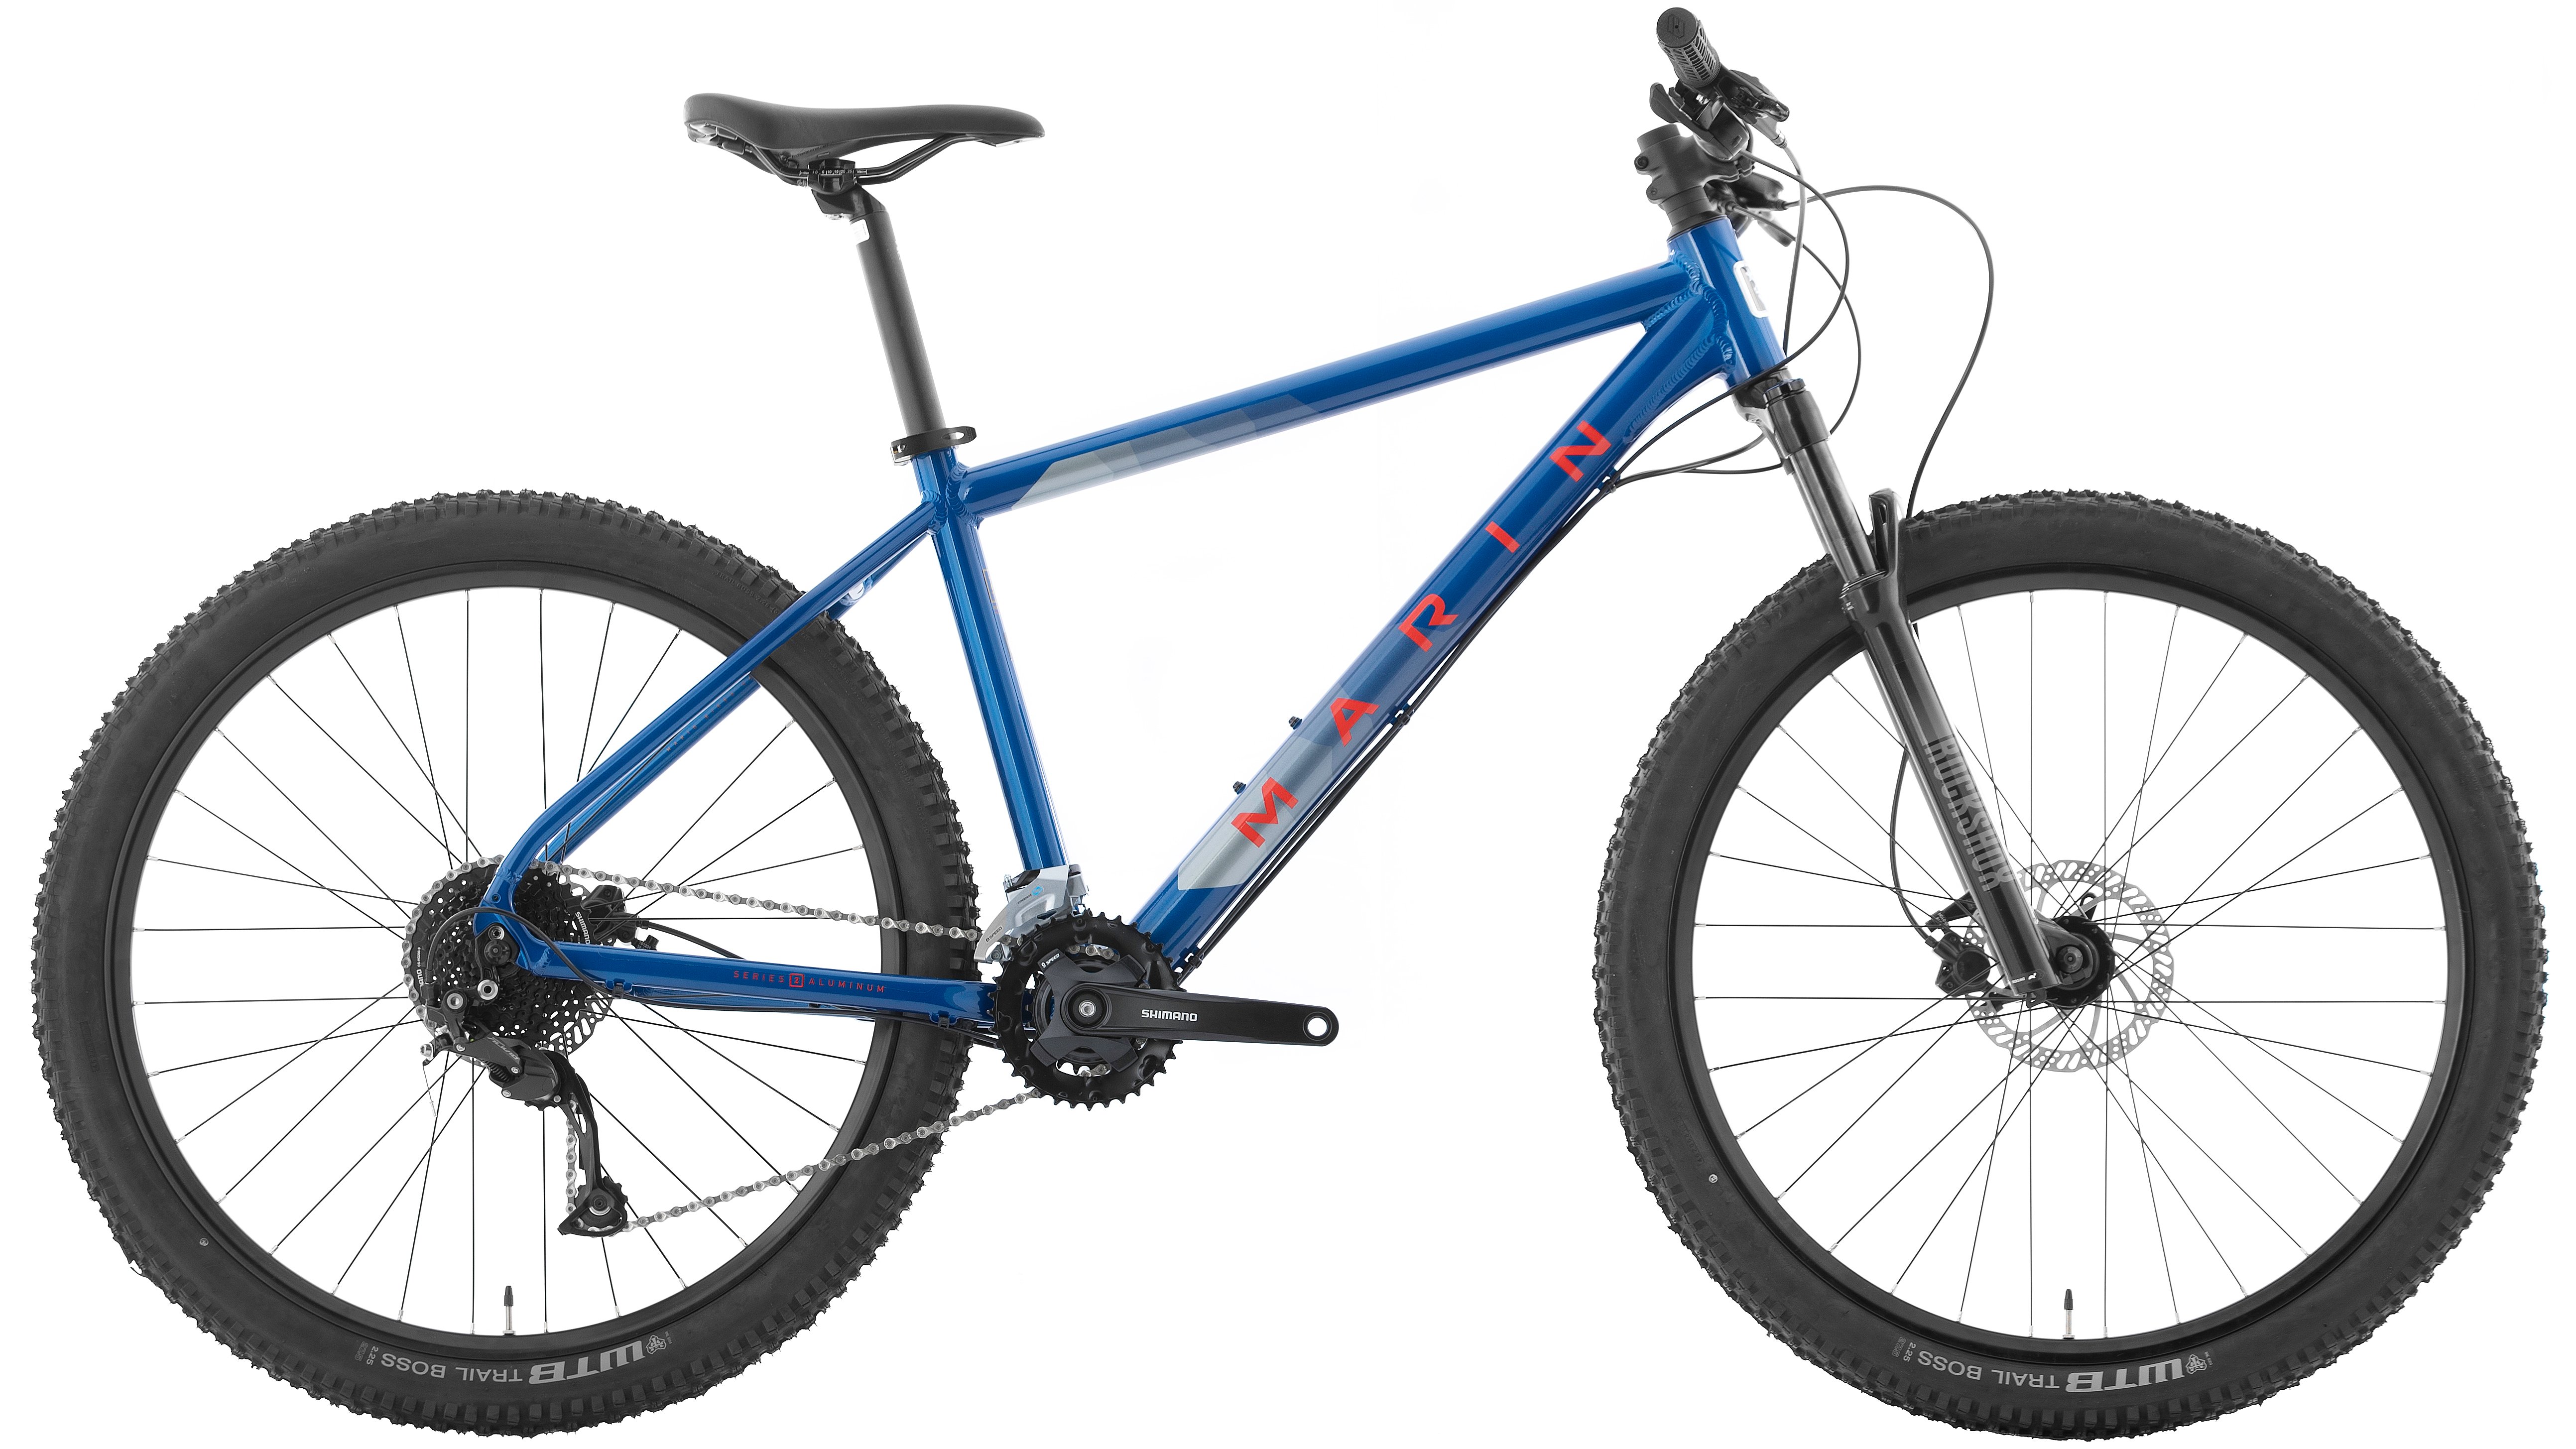 Blue Marin Palisades Trail 2 mountain bike with disc brakes